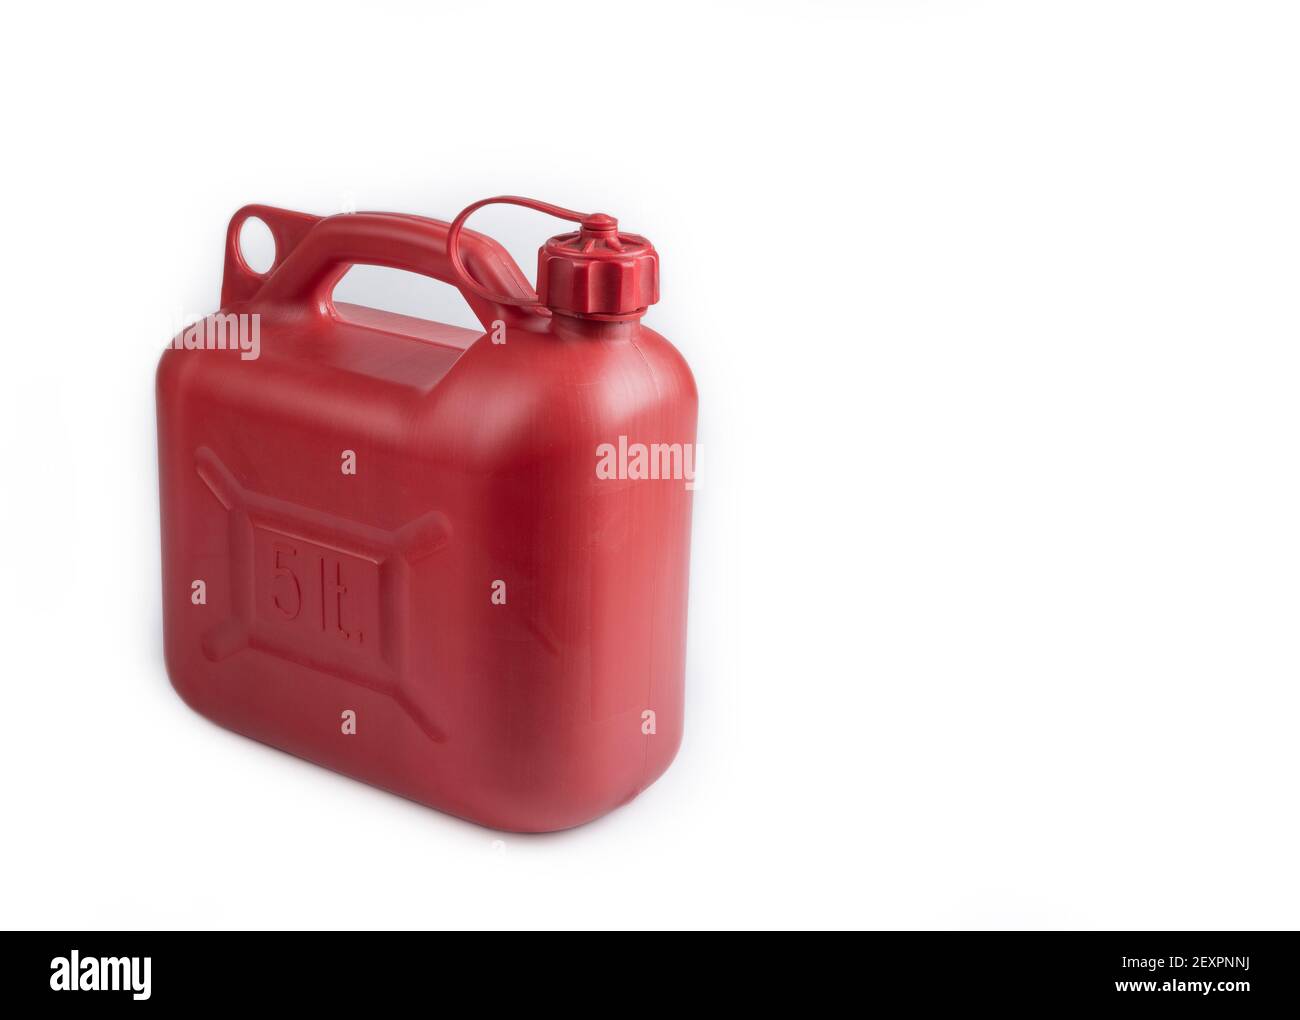 Plastic red 5 liter gas canister on a white Stock Photo